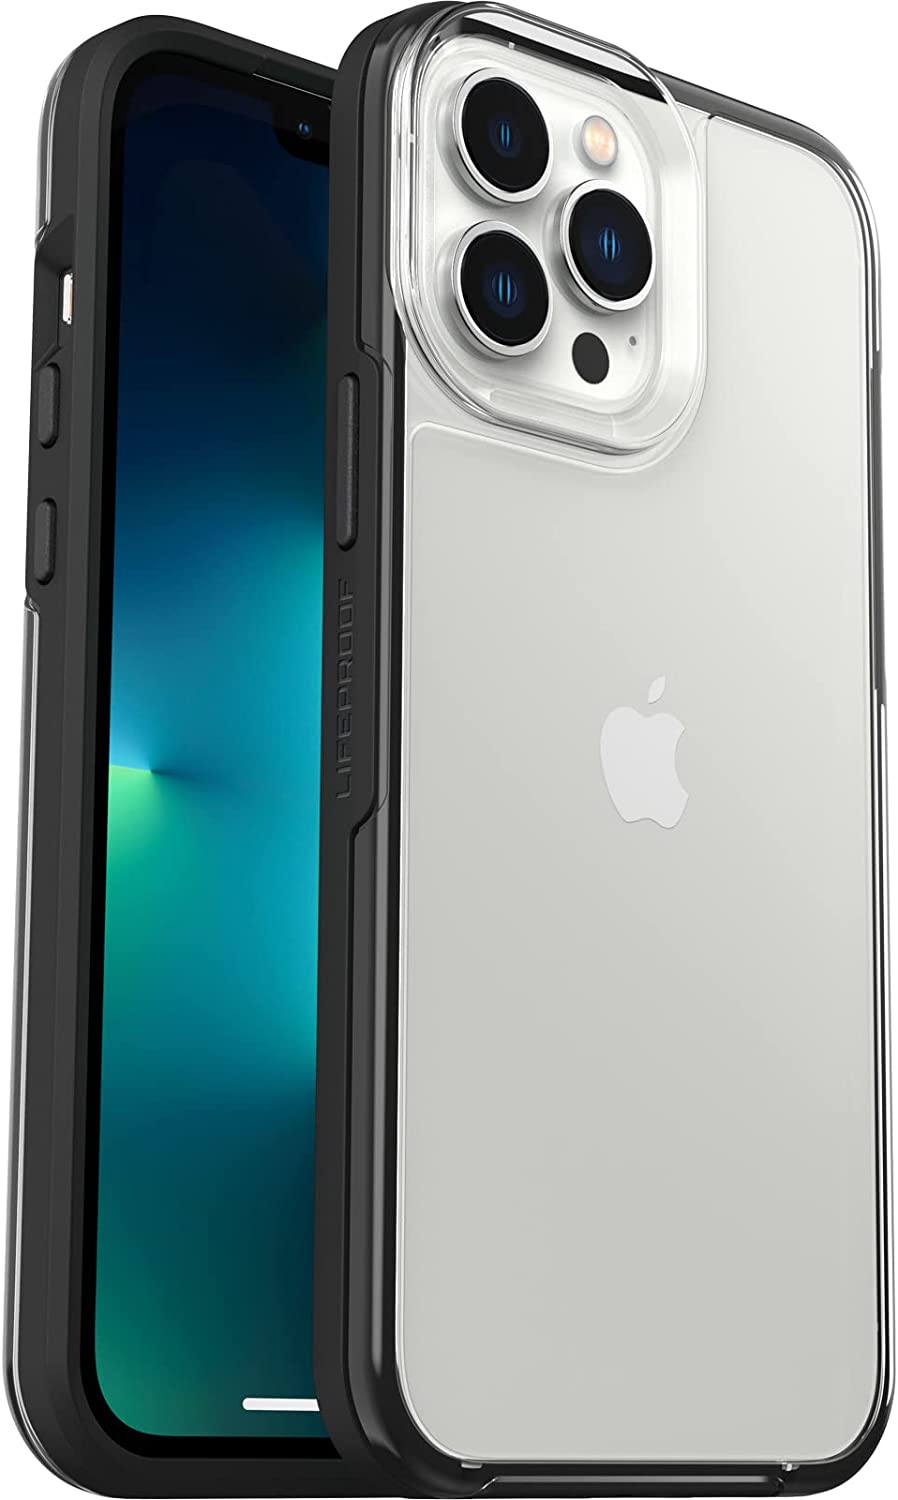 LifeProof SEE SERIES Case for iPhone 13 Pro Max / 12 Pro Max - Black Crystal (Certified Refurbished)